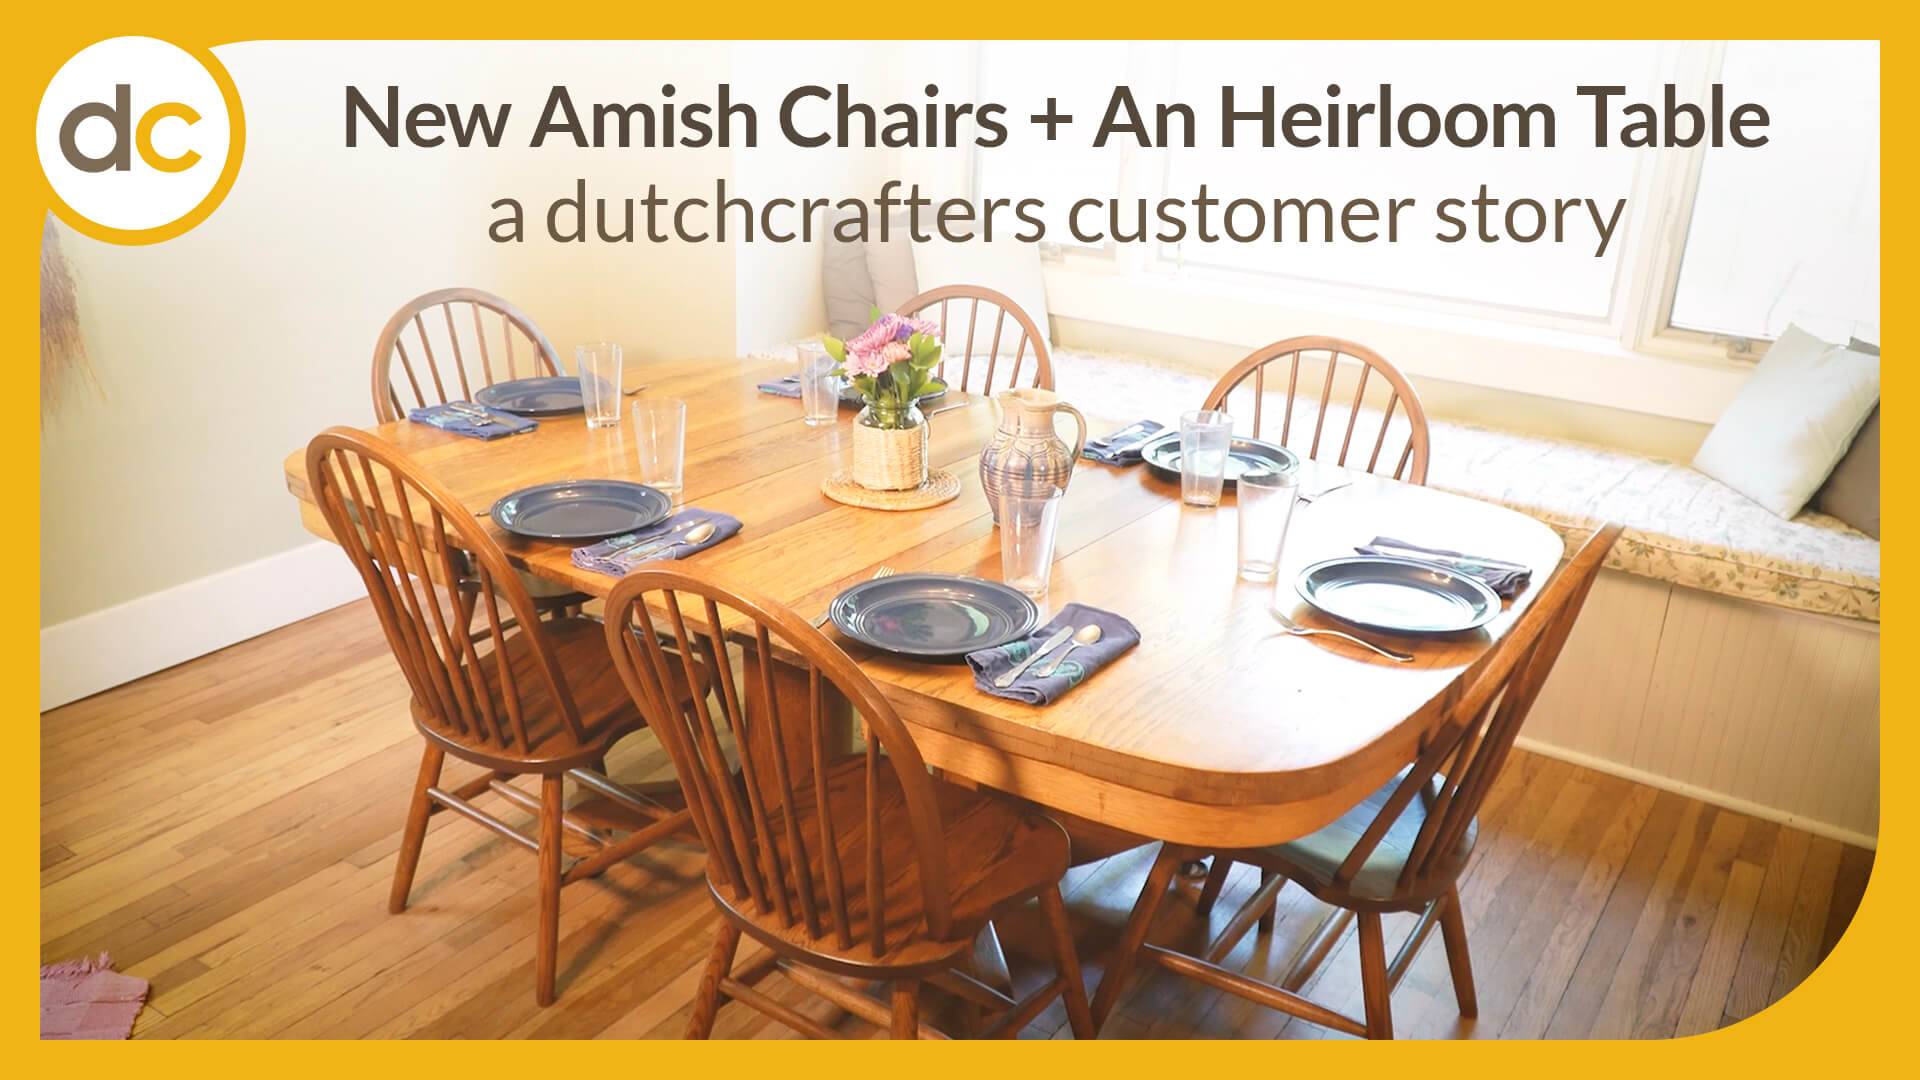 Video Thumbnail for New Amish Chairs + Heirloom Table: a DutchCrafters customer story